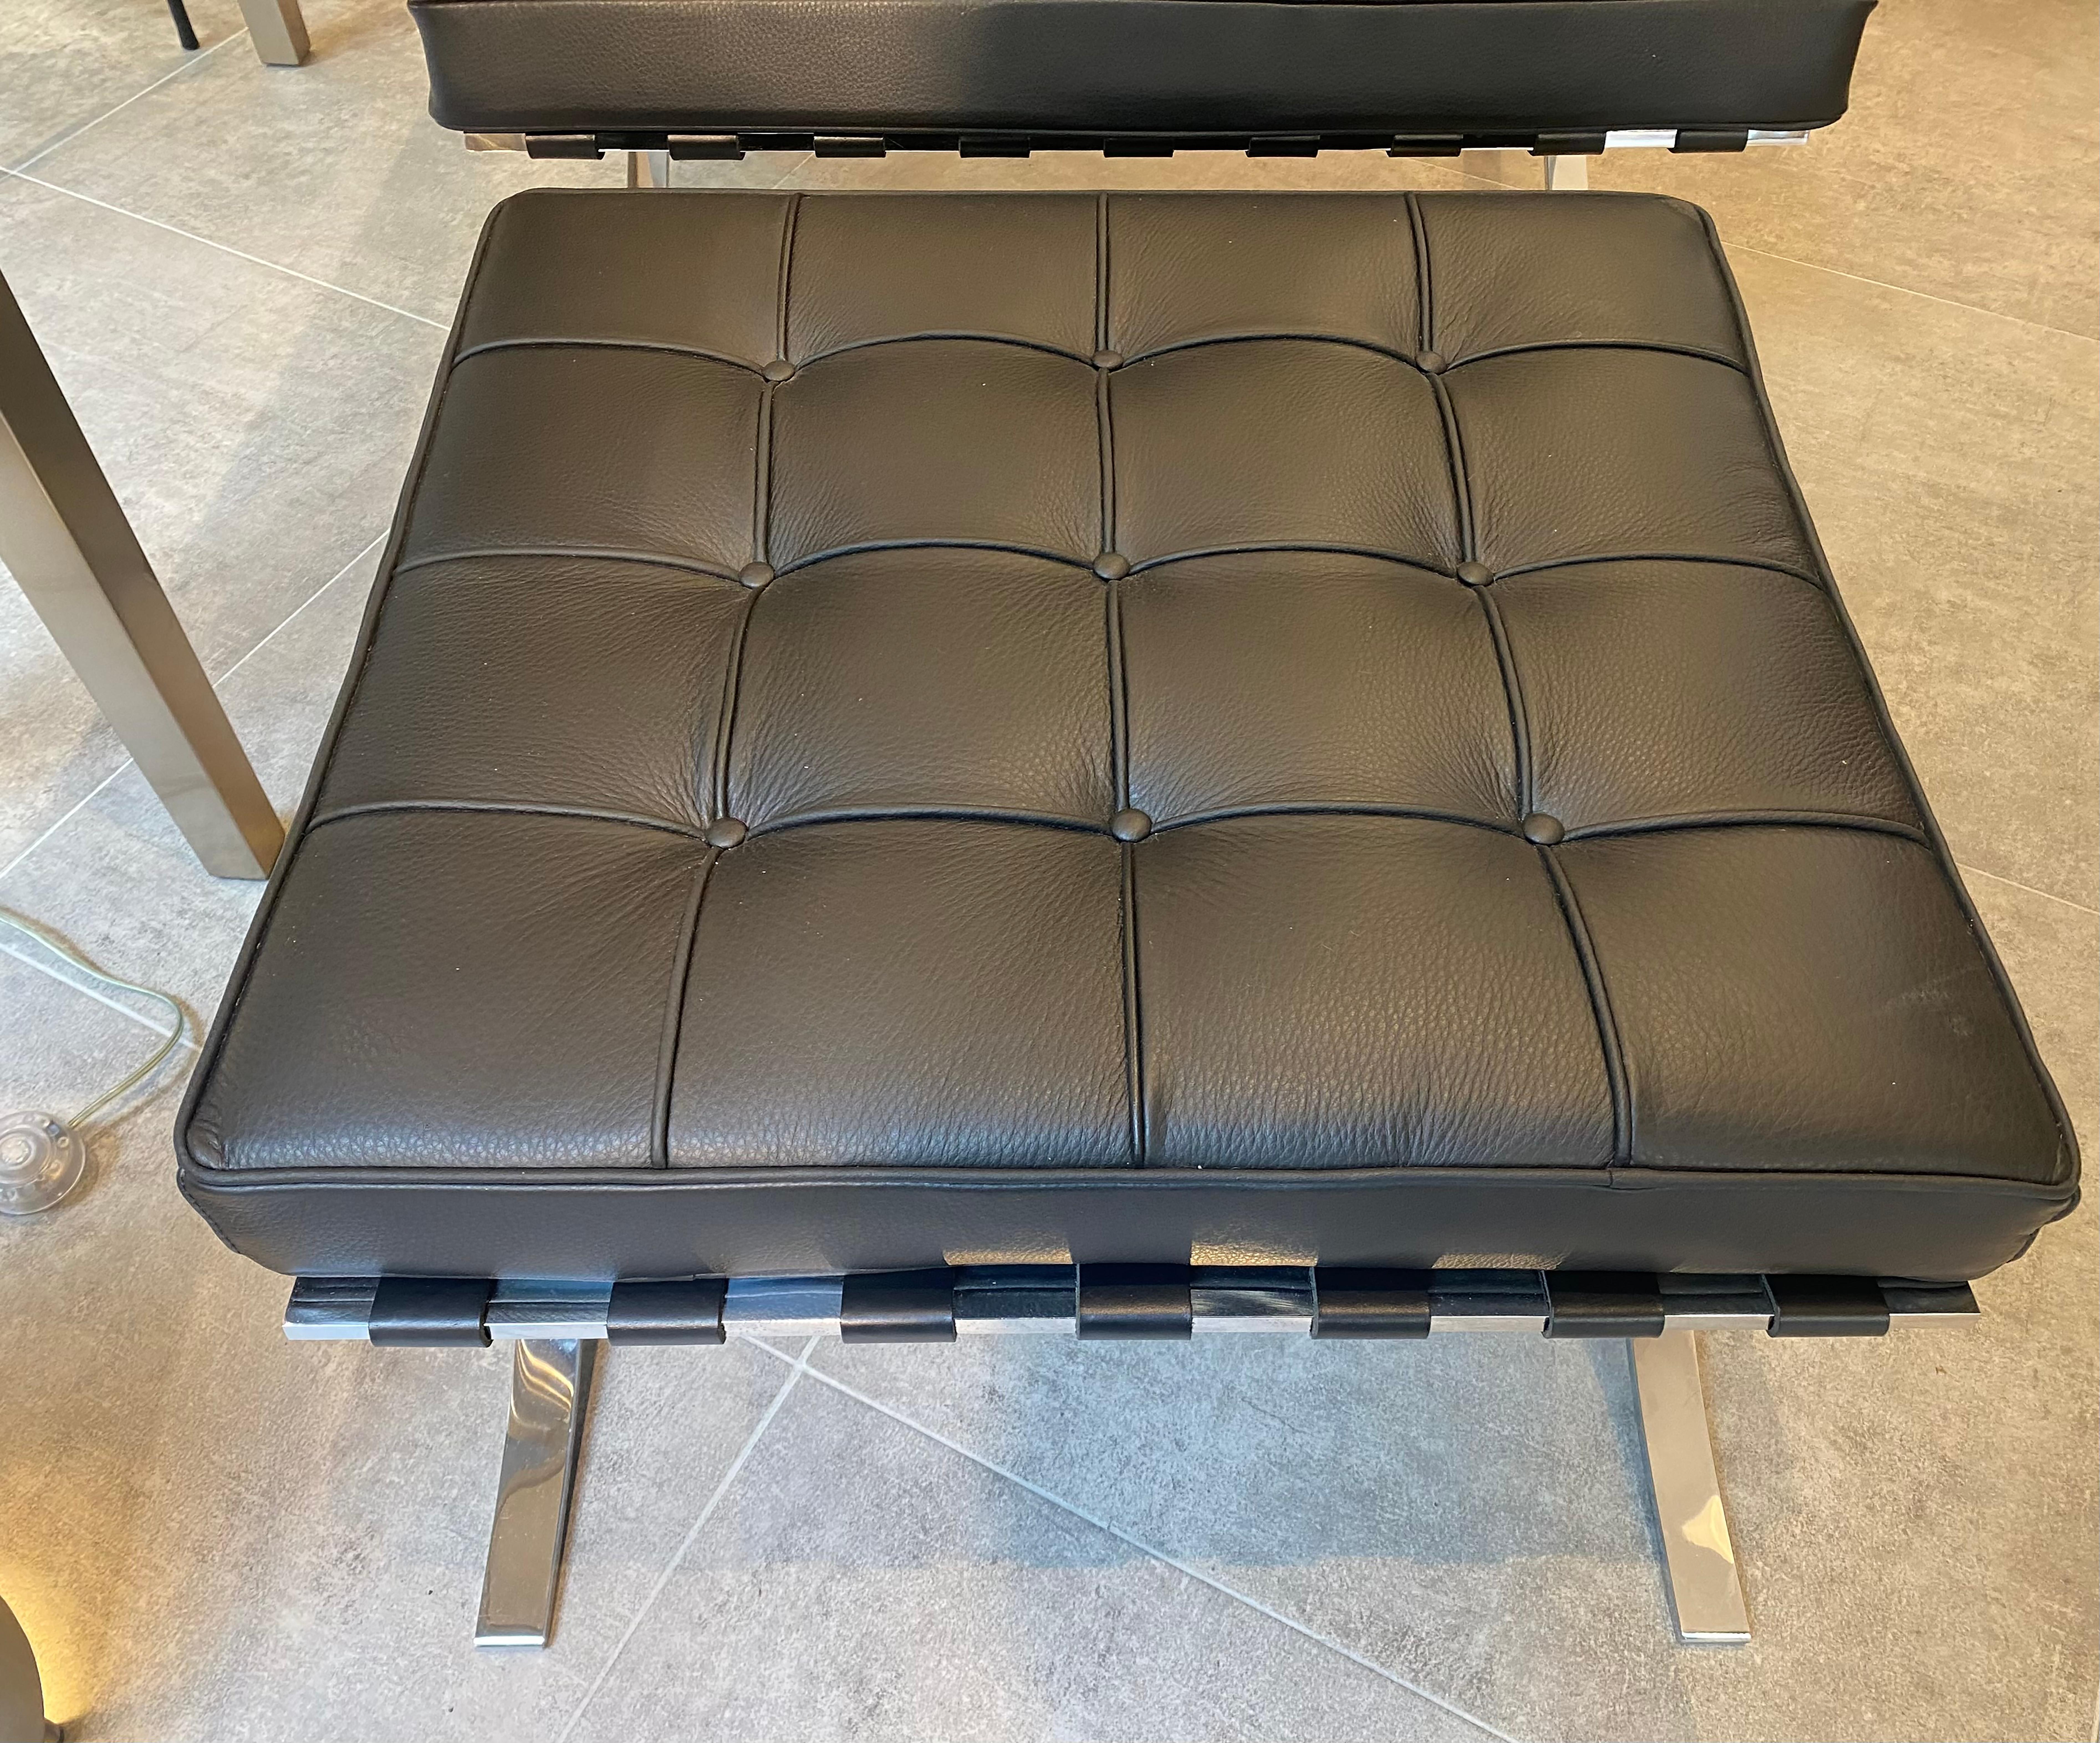 Mies Van Der Rohe Barcelona
Barcelona Armchair and its ottoman, 2010
Publisher KNOLL

Black leather and chromed steel

Dimensions: Armchair: W 75cm x D 77cm x H 77cm - Seat H 43cm
Ottoman: W 59 x H 39 x D 59.5 cm

ref : 4363/3
Price : 5900